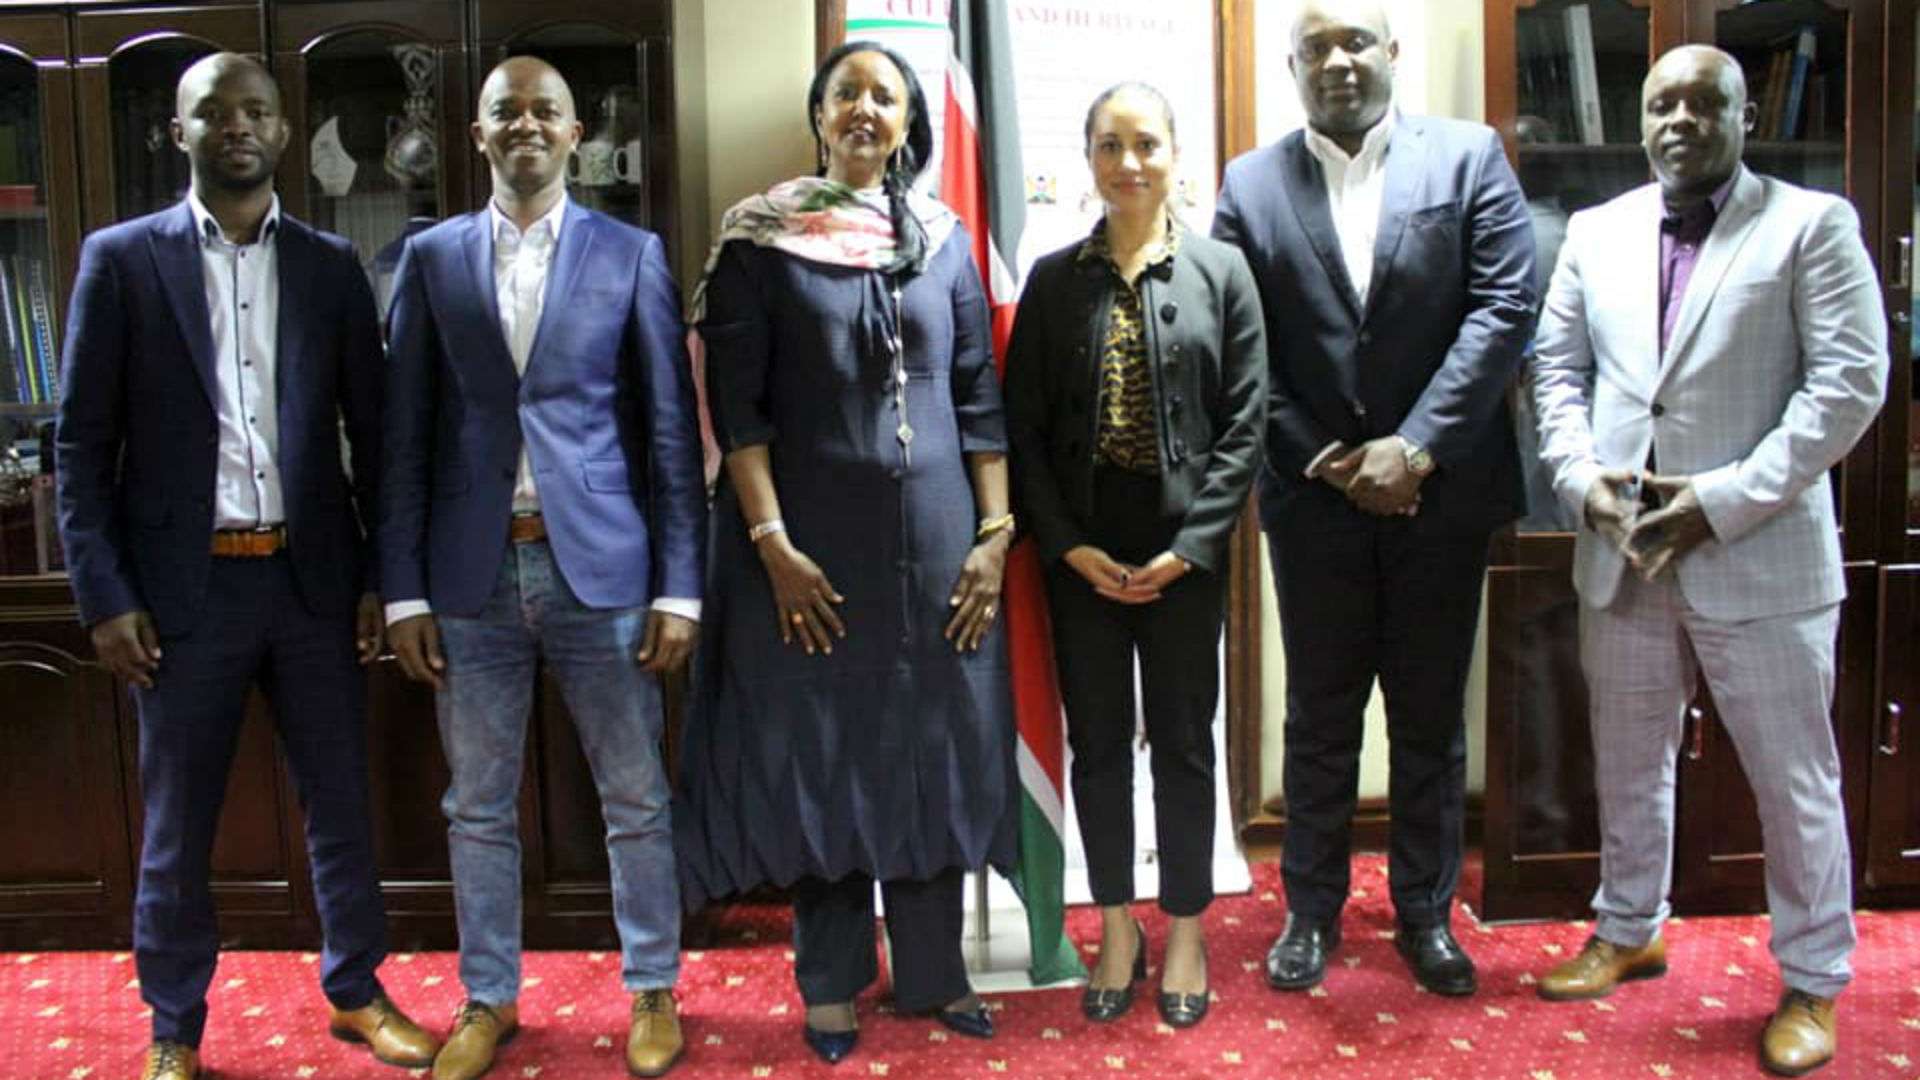 Fifa official Sarah Solemale FKF President NICK Mwendwa Barry Otieno and Amina Mohammed.